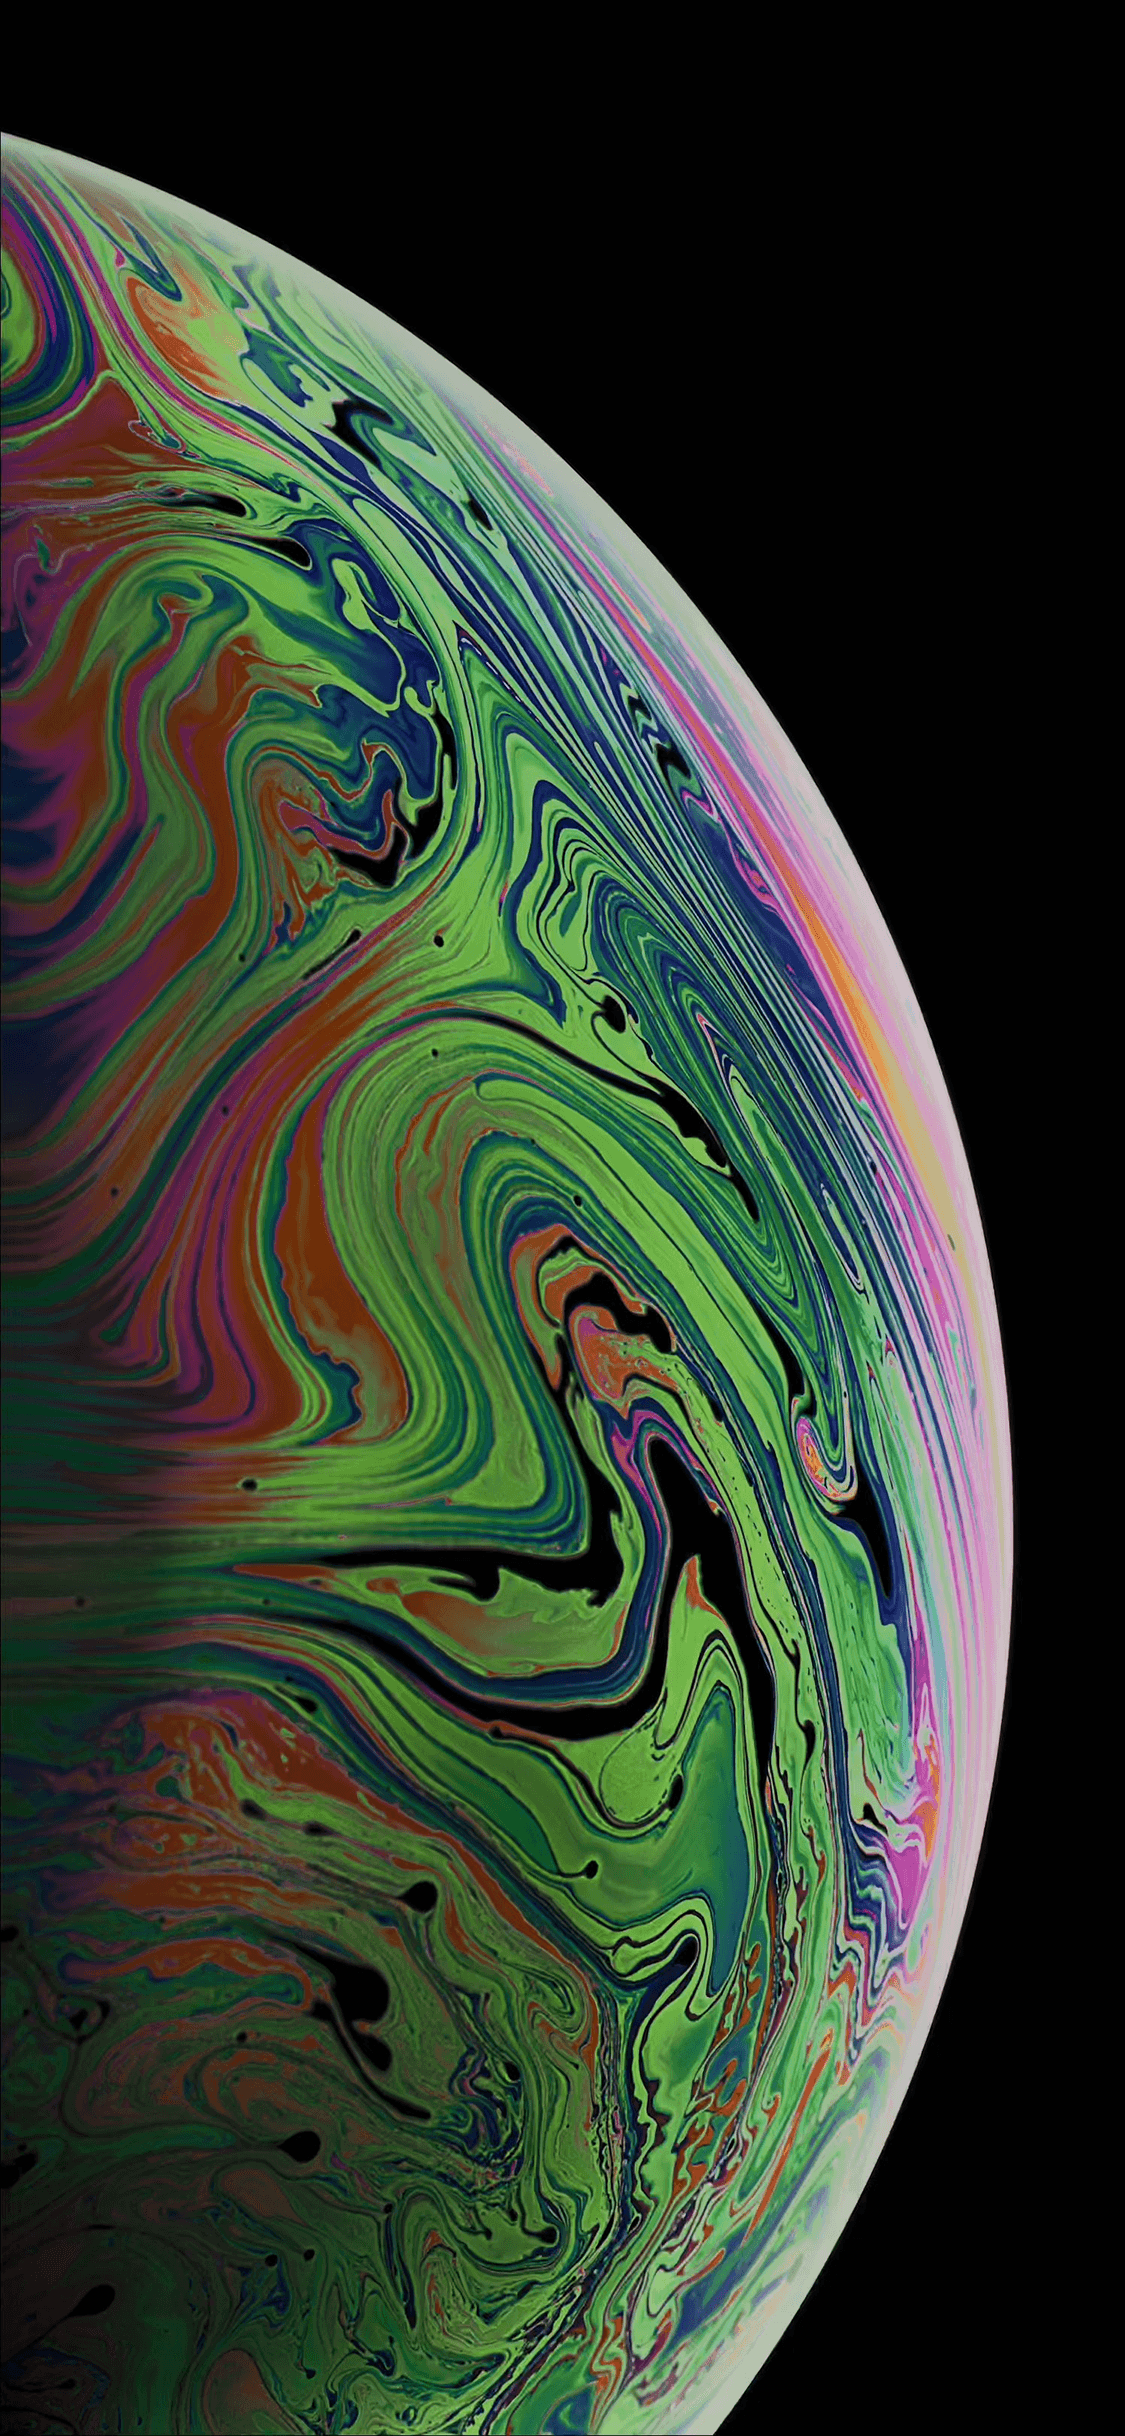 Iphone Xr Stock Wallpapers